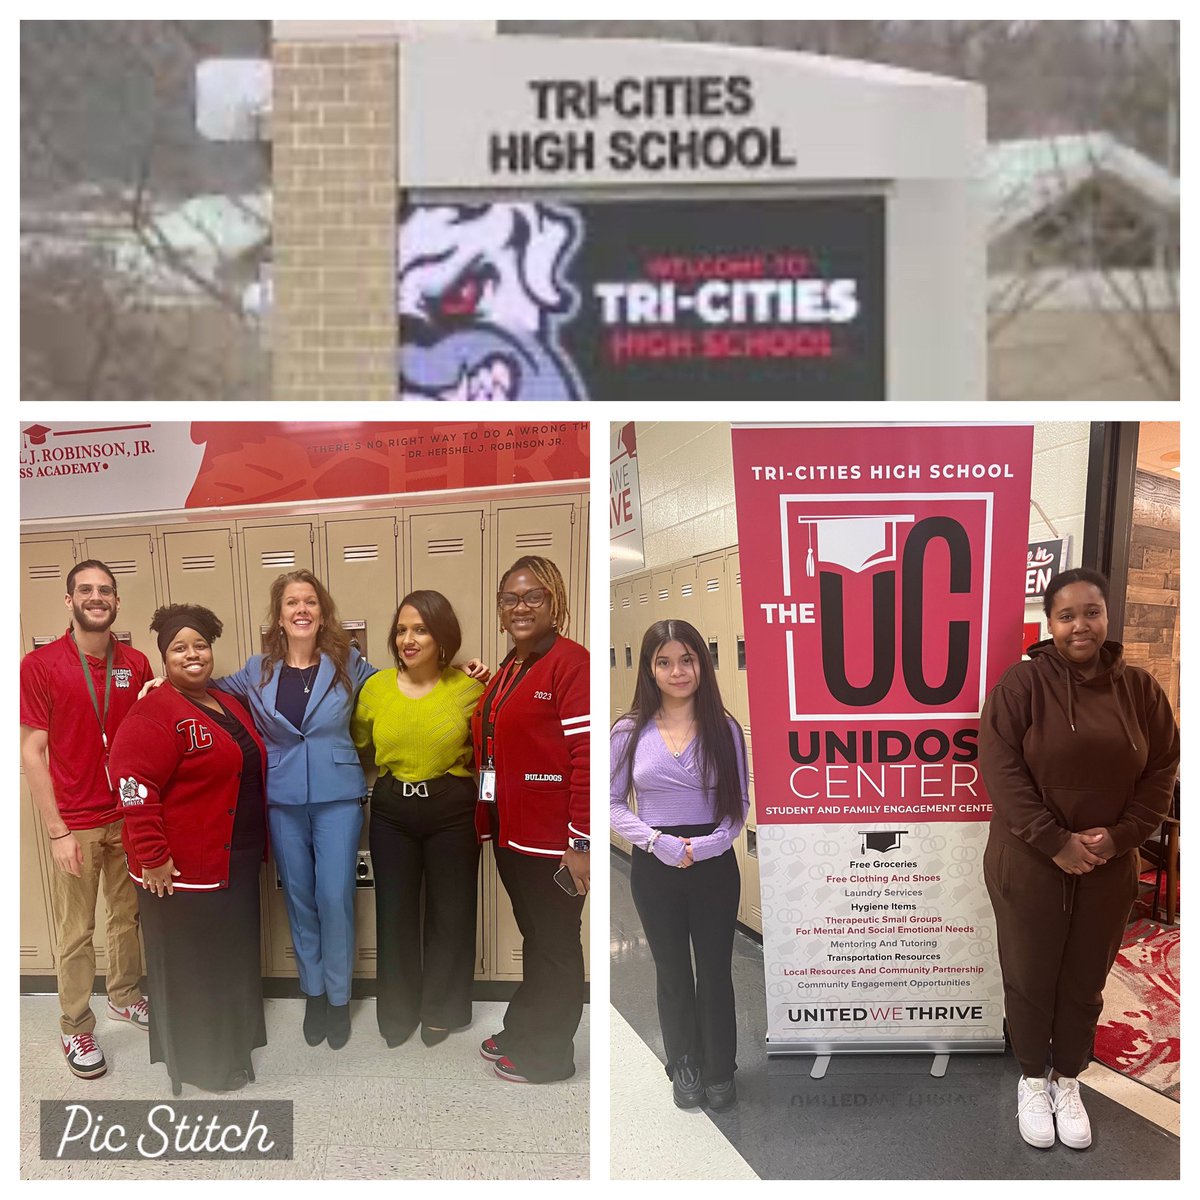 Such an amazing visit to the Success Academy at Tri-Cities HS! The dedication to student success by these phenomenal educators is inspiring! Thank you AP Stoney, Counselor Green and Mr. Ayalarosado! Keep changing lives! @Shamonaharrell @BFGaskins @LettMeLeadTC @Tri_CitiesHigh